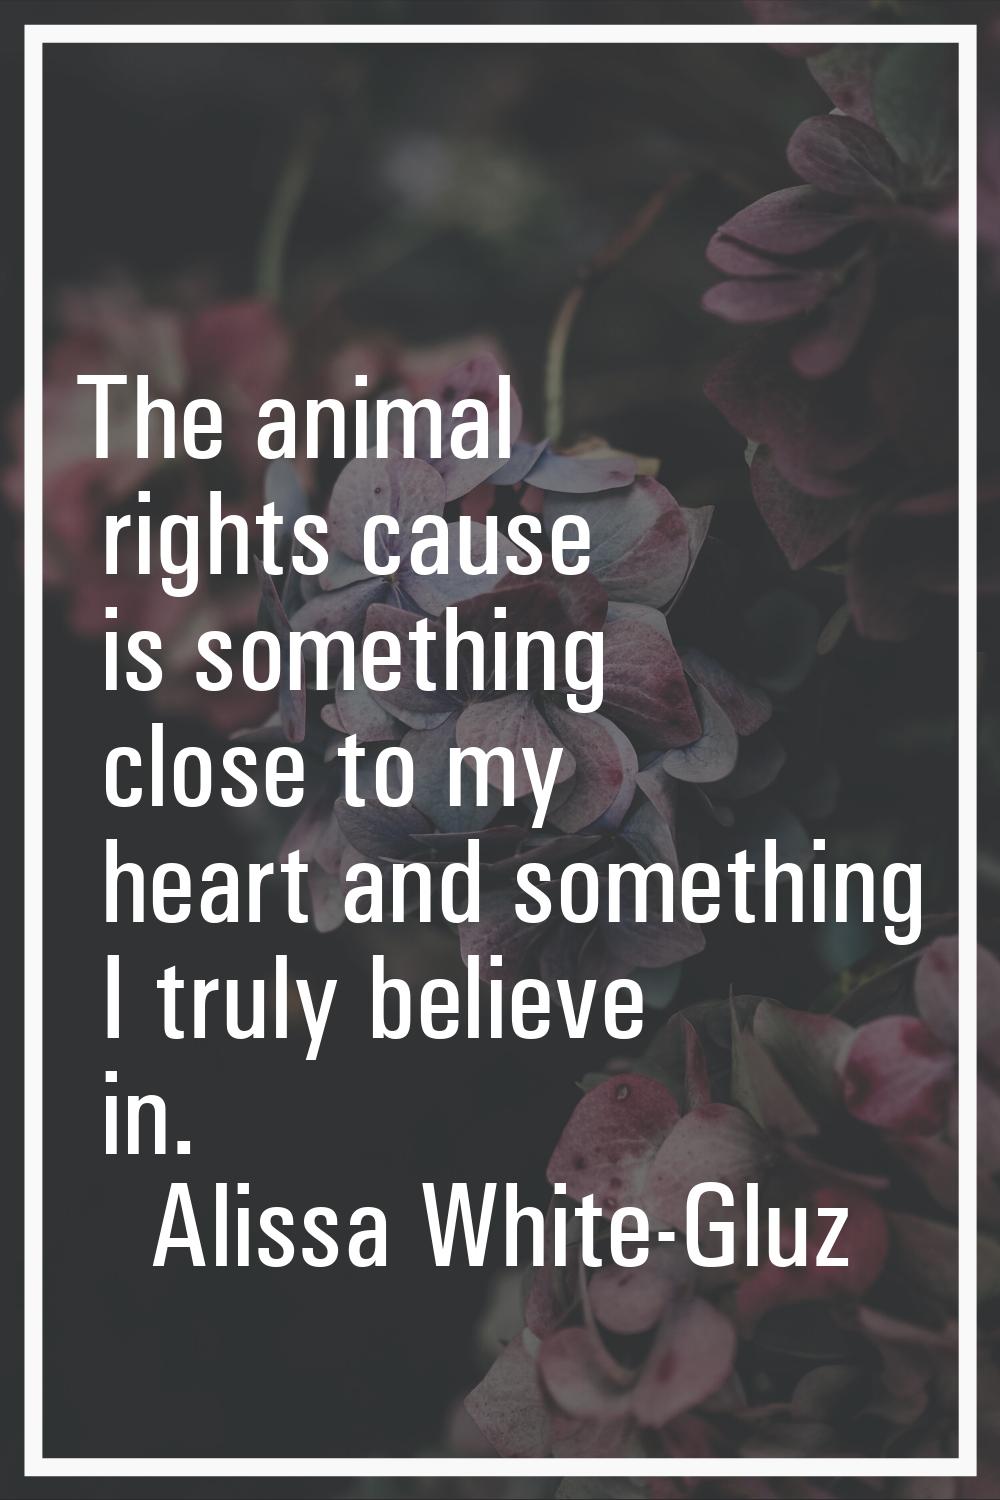 The animal rights cause is something close to my heart and something I truly believe in.